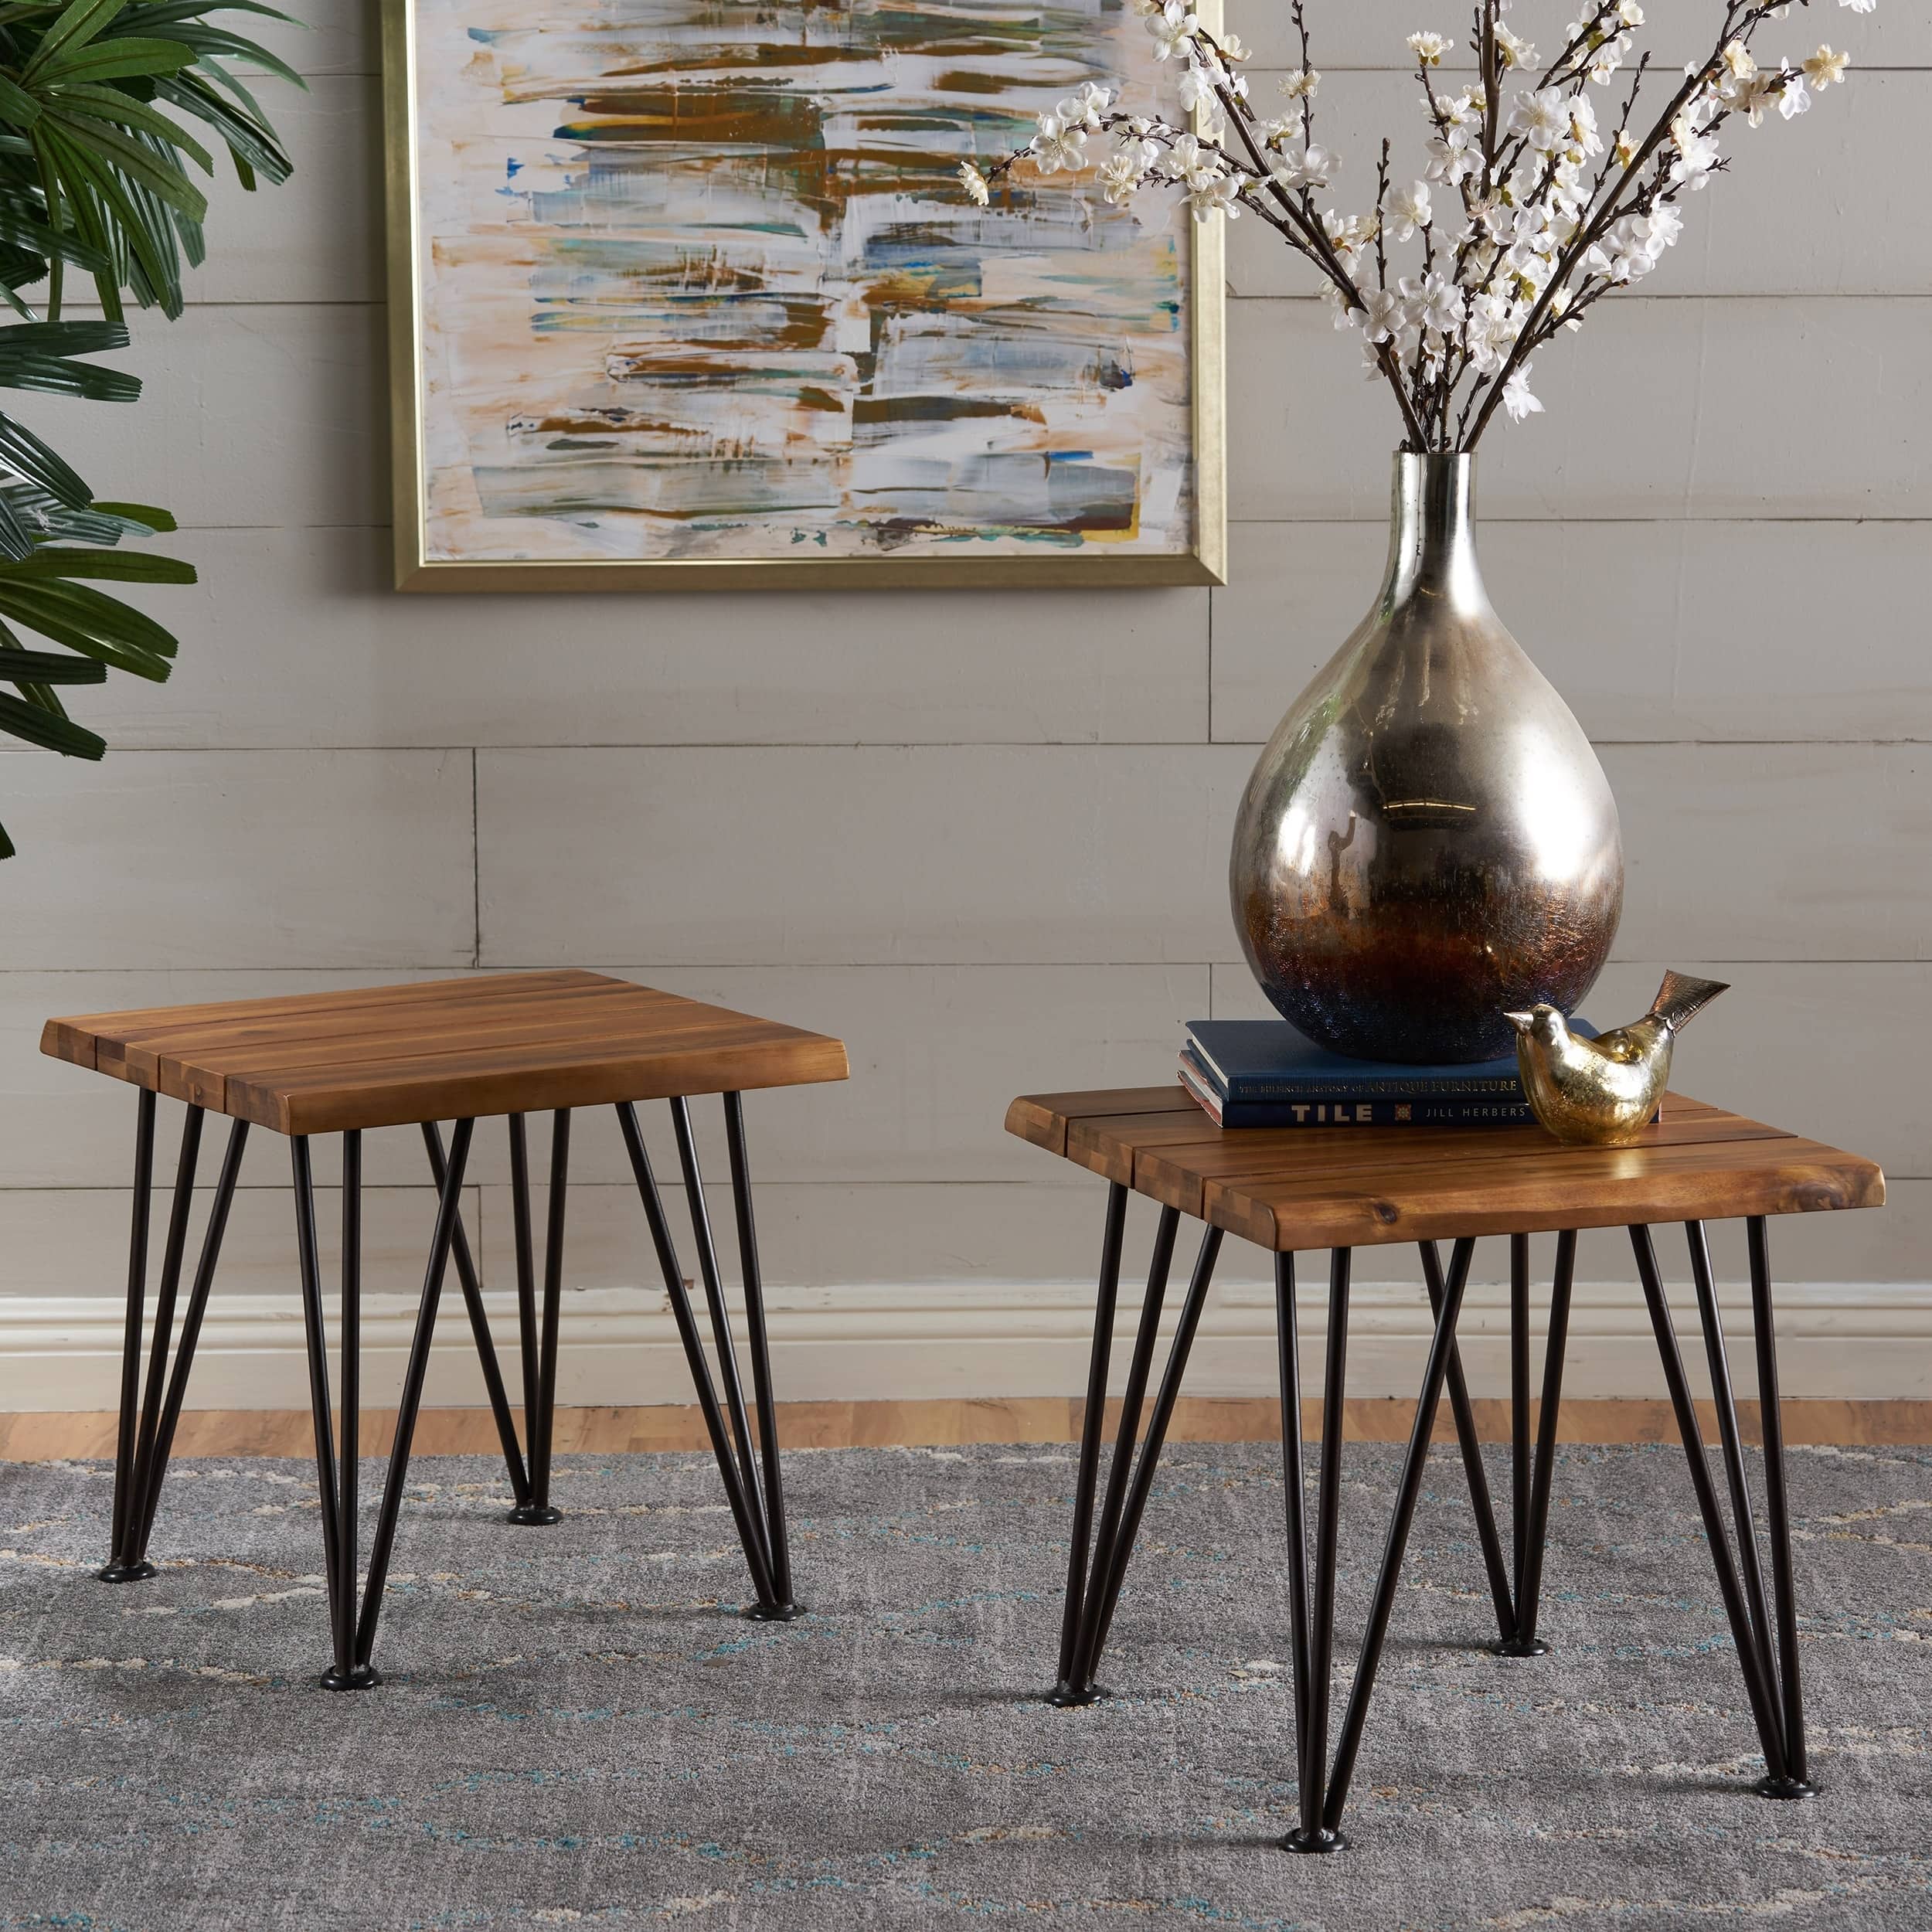 Buy Outdoor Coffee & Side Tables Online at Overstock | Our Best Patio